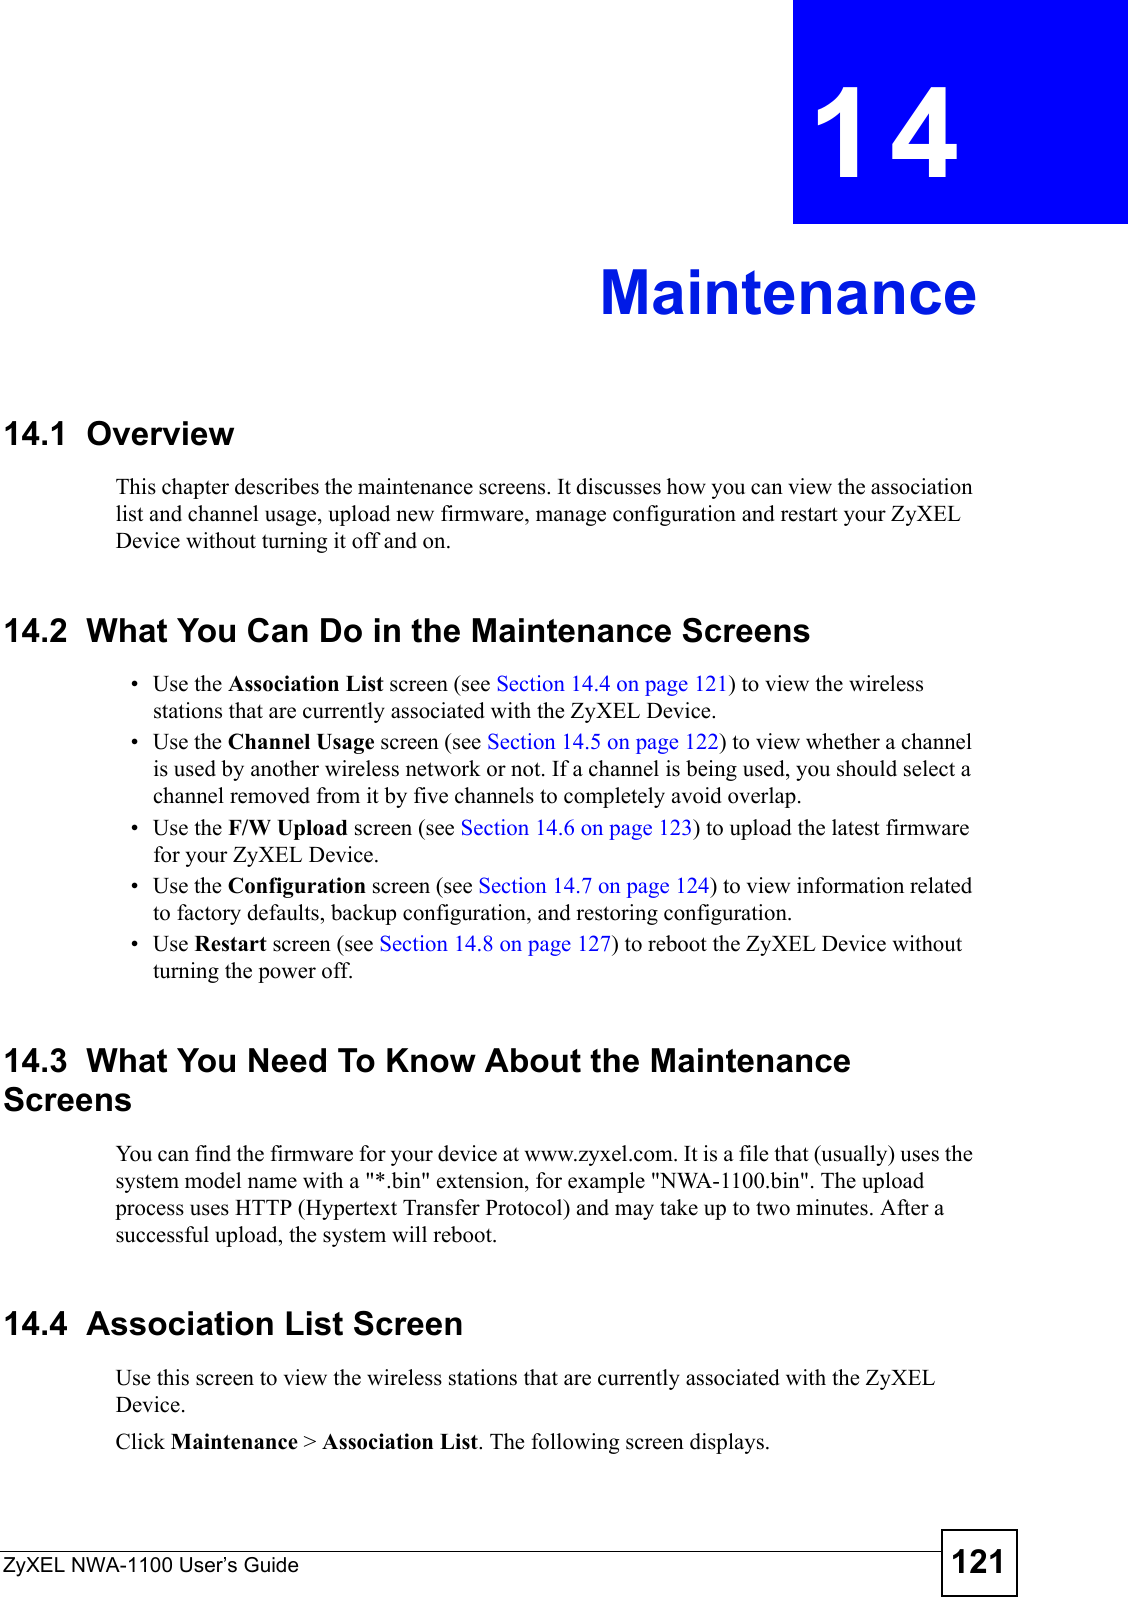 ZyXEL NWA-1100 User’s Guide 121CHAPTER  14 Maintenance14.1  OverviewThis chapter describes the maintenance screens. It discusses how you can view the association list and channel usage, upload new firmware, manage configuration and restart your ZyXEL Device without turning it off and on. 14.2  What You Can Do in the Maintenance Screens• Use the Association List screen (see Section 14.4 on page 121) to view the wireless stations that are currently associated with the ZyXEL Device.•Use the Channel Usage screen (see Section 14.5 on page 122) to view whether a channel is used by another wireless network or not. If a channel is being used, you should select a channel removed from it by five channels to completely avoid overlap.• Use the F/W Upload screen (see Section 14.6 on page 123) to upload the latest firmware for your ZyXEL Device.• Use the Configuration screen (see Section 14.7 on page 124) to view information related to factory defaults, backup configuration, and restoring configuration.•Use Restart screen (see Section 14.8 on page 127) to reboot the ZyXEL Device without turning the power off. 14.3  What You Need To Know About the Maintenance ScreensYou can find the firmware for your device at www.zyxel.com. It is a file that (usually) uses the system model name with a &quot;*.bin&quot; extension, for example &quot;NWA-1100.bin&quot;. The upload process uses HTTP (Hypertext Transfer Protocol) and may take up to two minutes. After a successful upload, the system will reboot.14.4  Association List ScreenUse this screen to view the wireless stations that are currently associated with the ZyXEL Device. Click Maintenance &gt; Association List. The following screen displays.